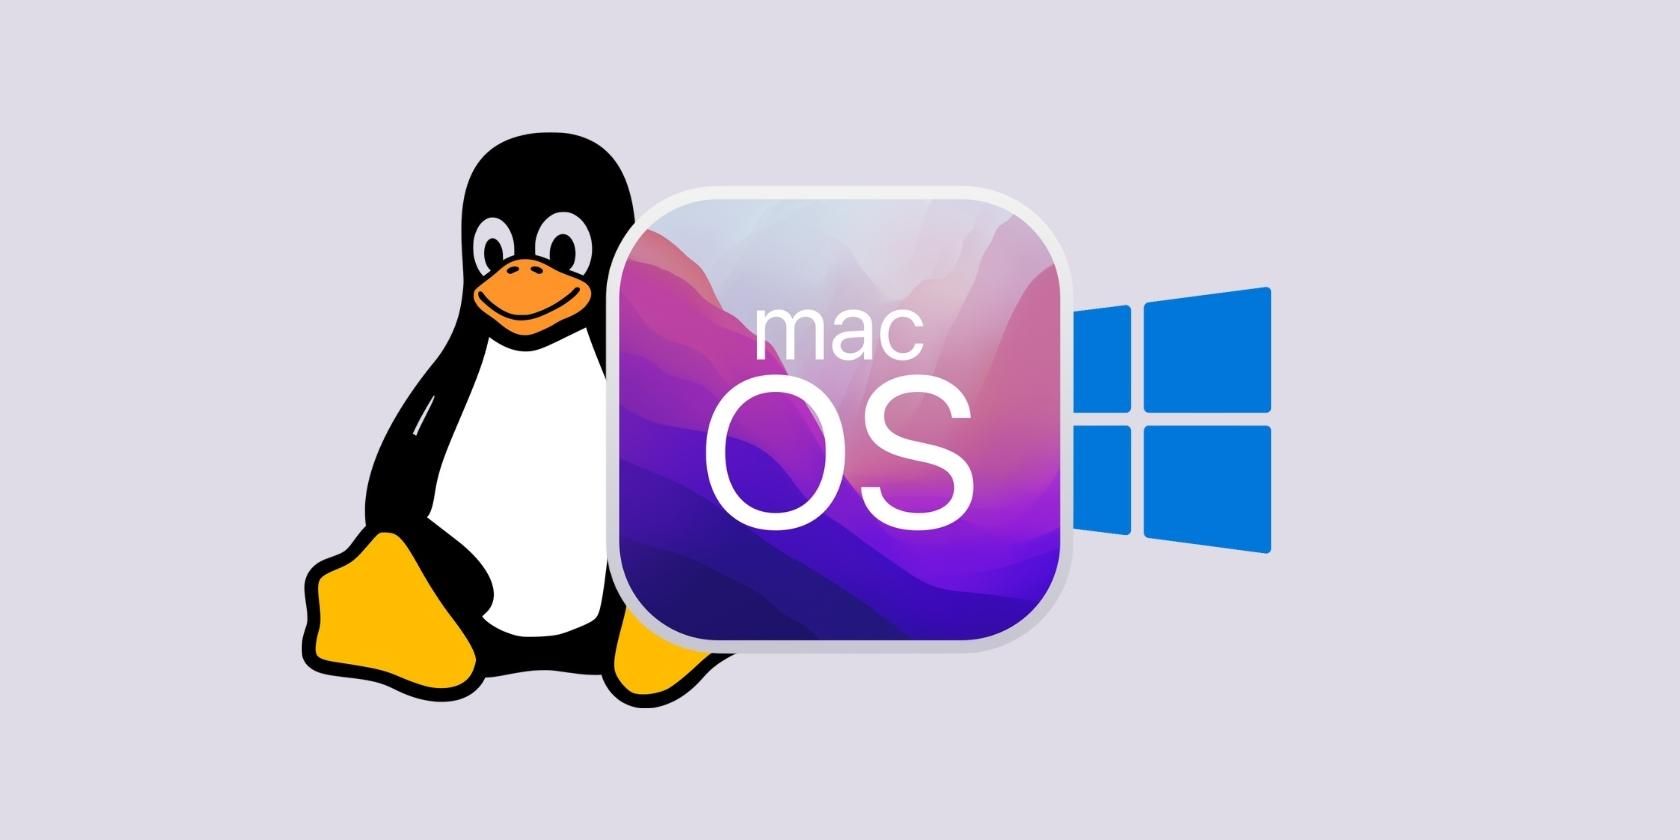 Linux, macOS, and Windows icons